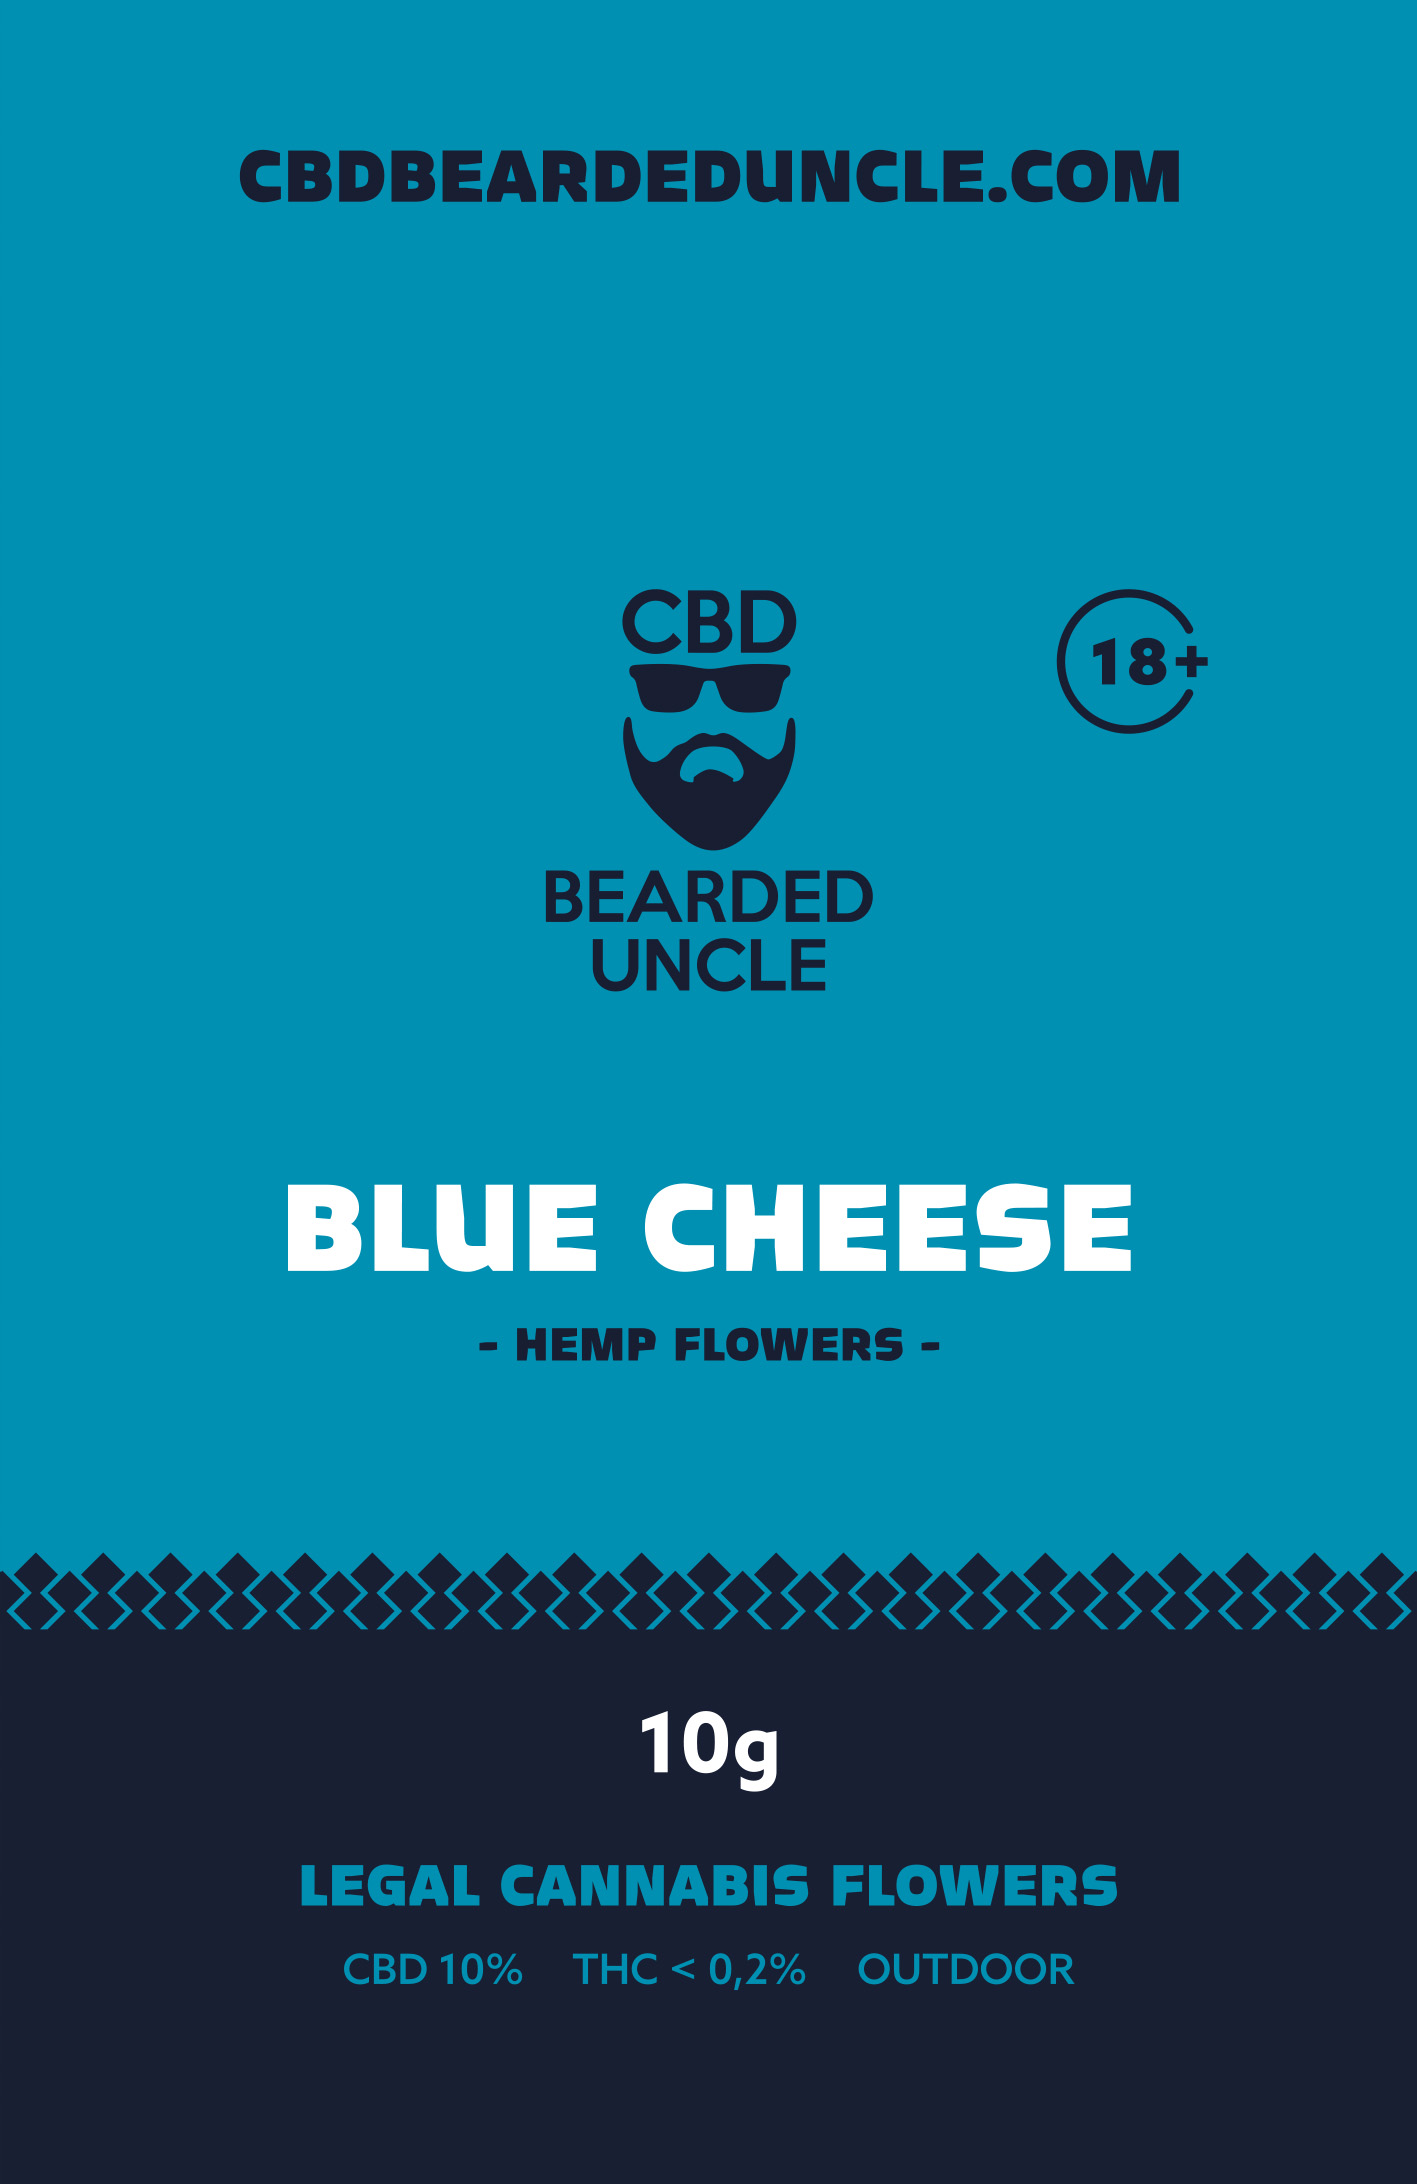 BEARDED UNCLE BLUE CHEESE OUTDOOR CBD 10% a THC 0,2% 10g 